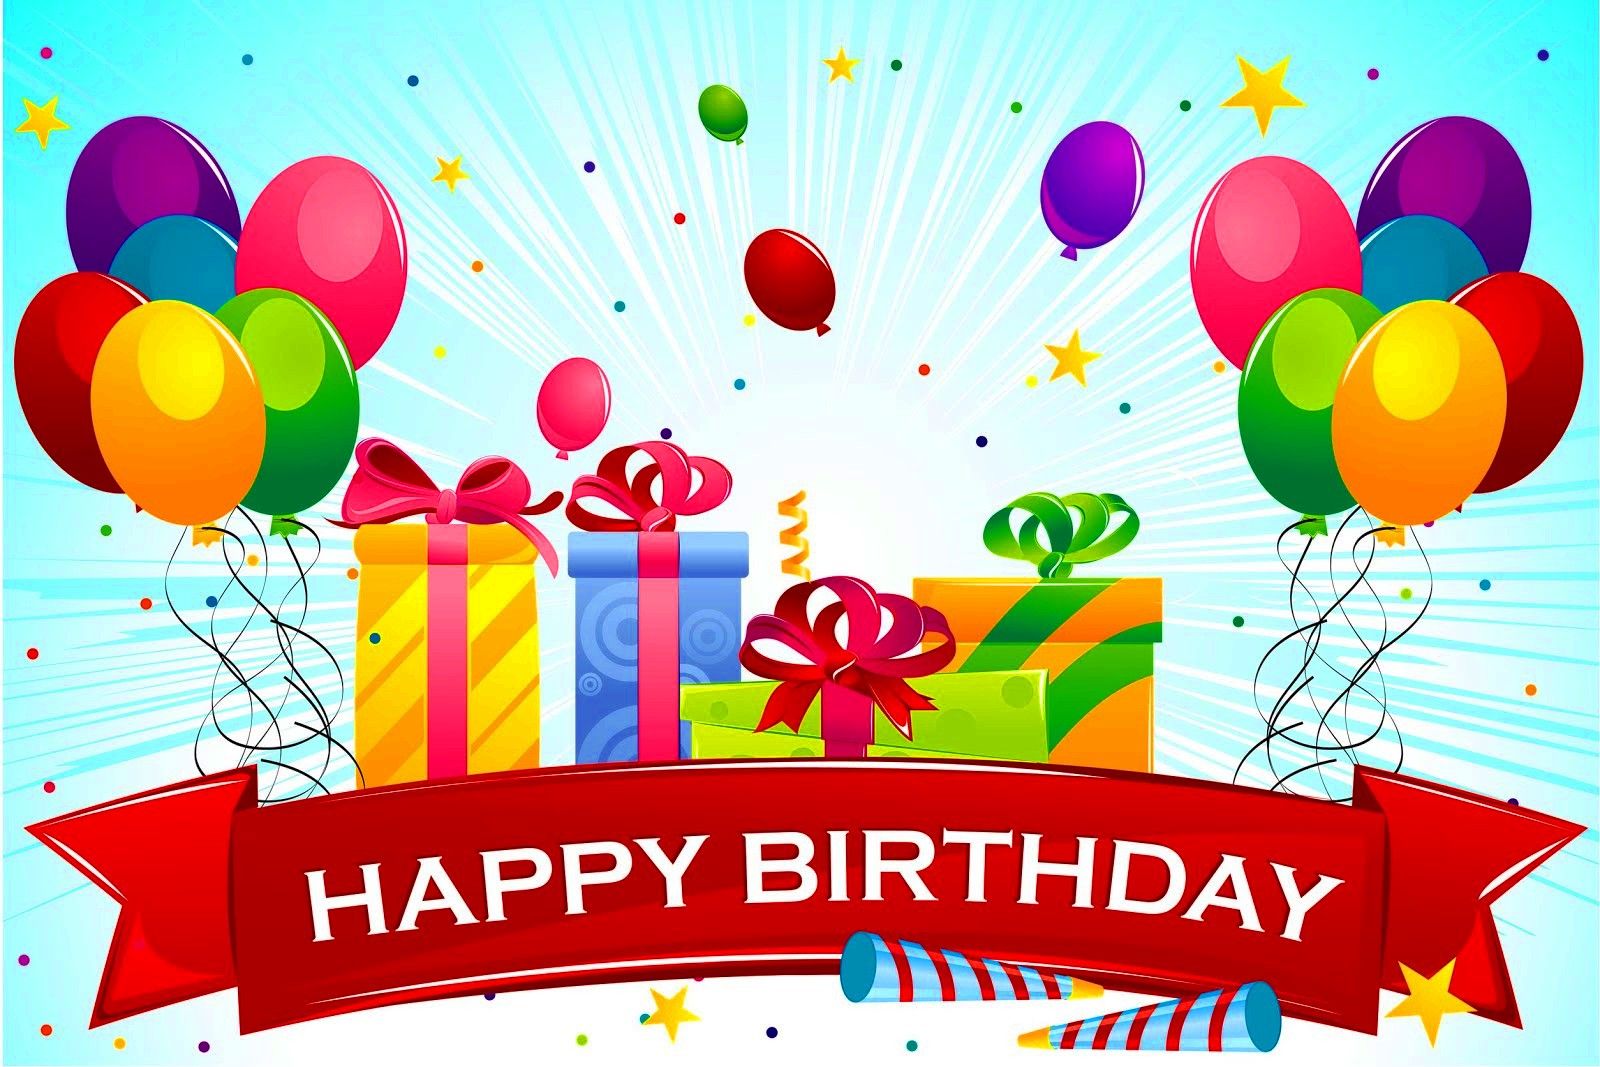 Detail Downloadable Free Happy Birthday Images Nomer 13